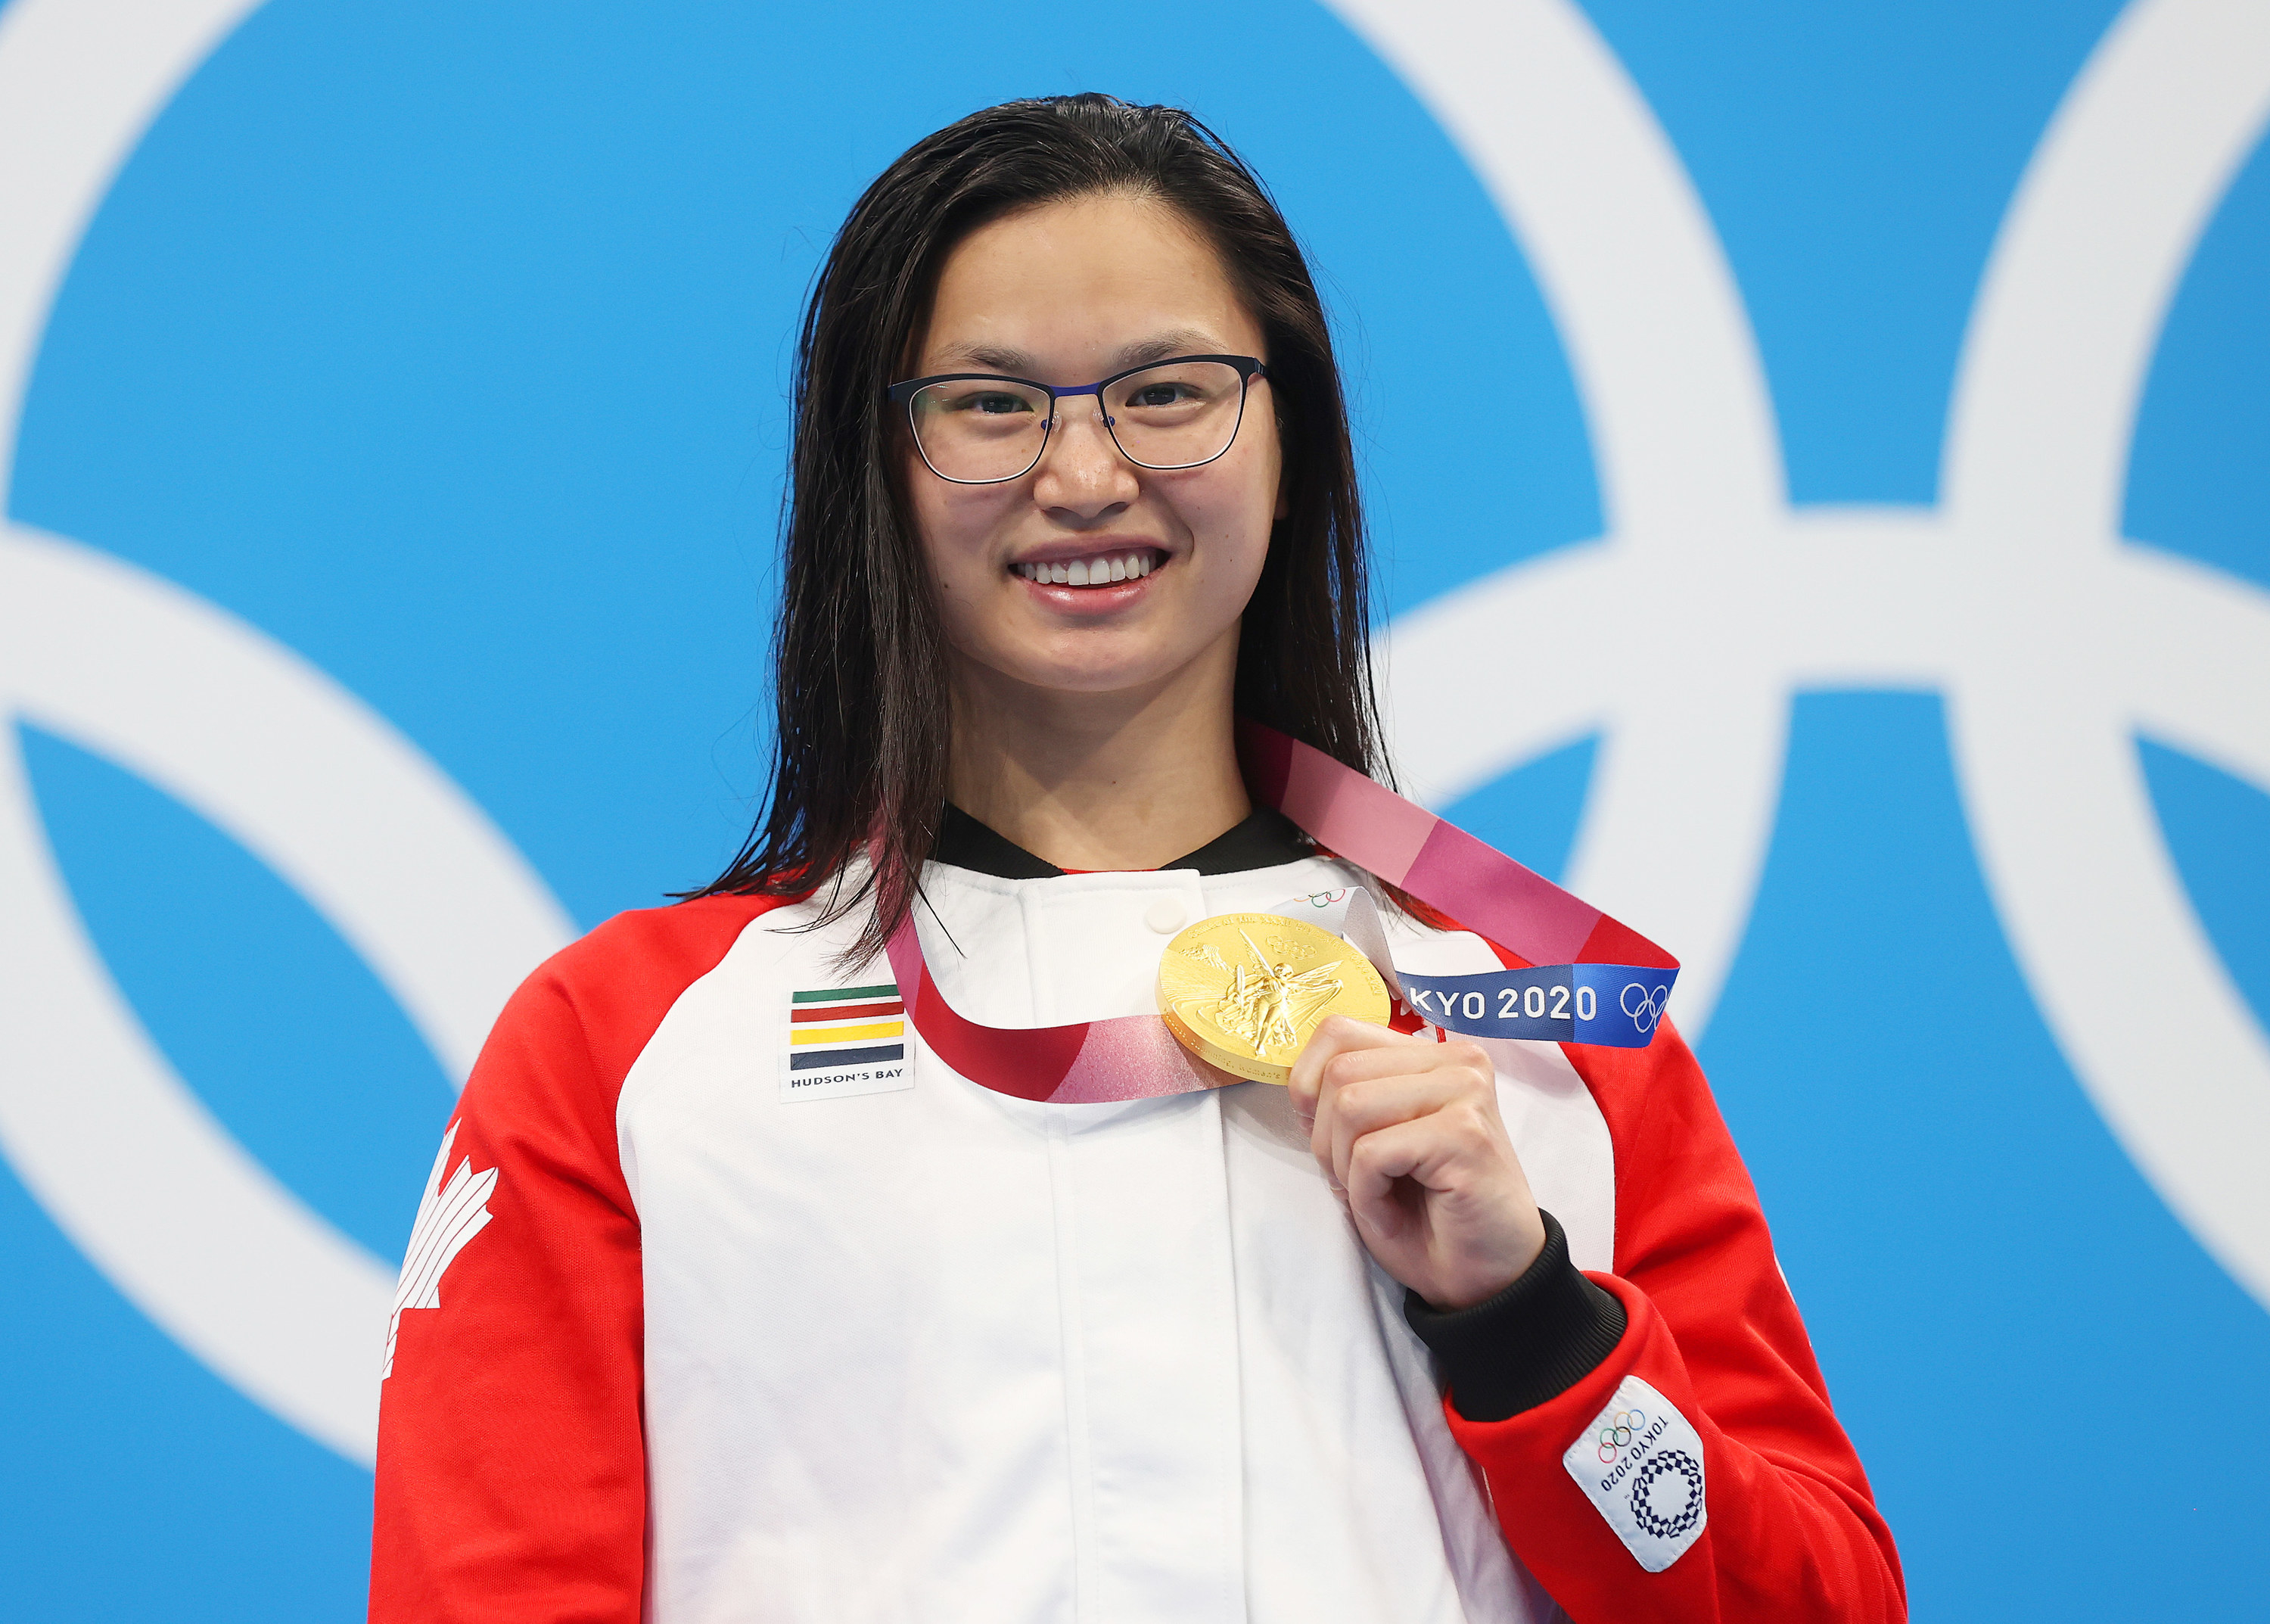 Maggie holding up her medal